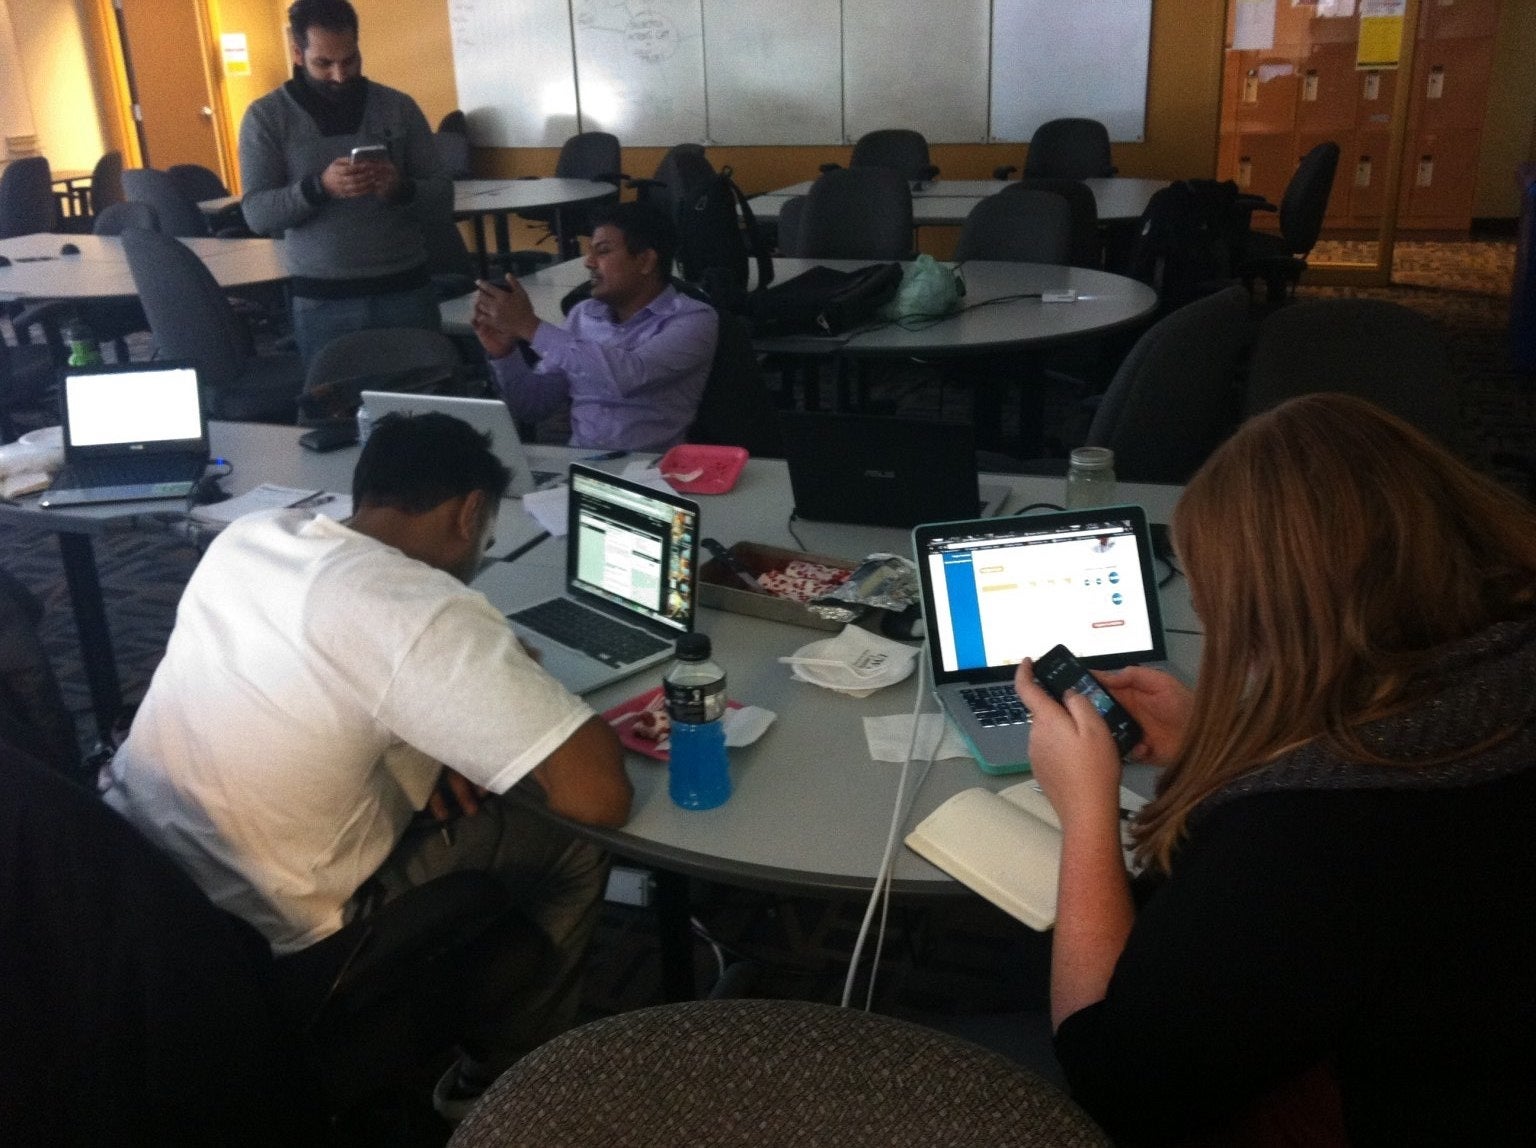 Team members of RBC+ working on their phones and laptops.